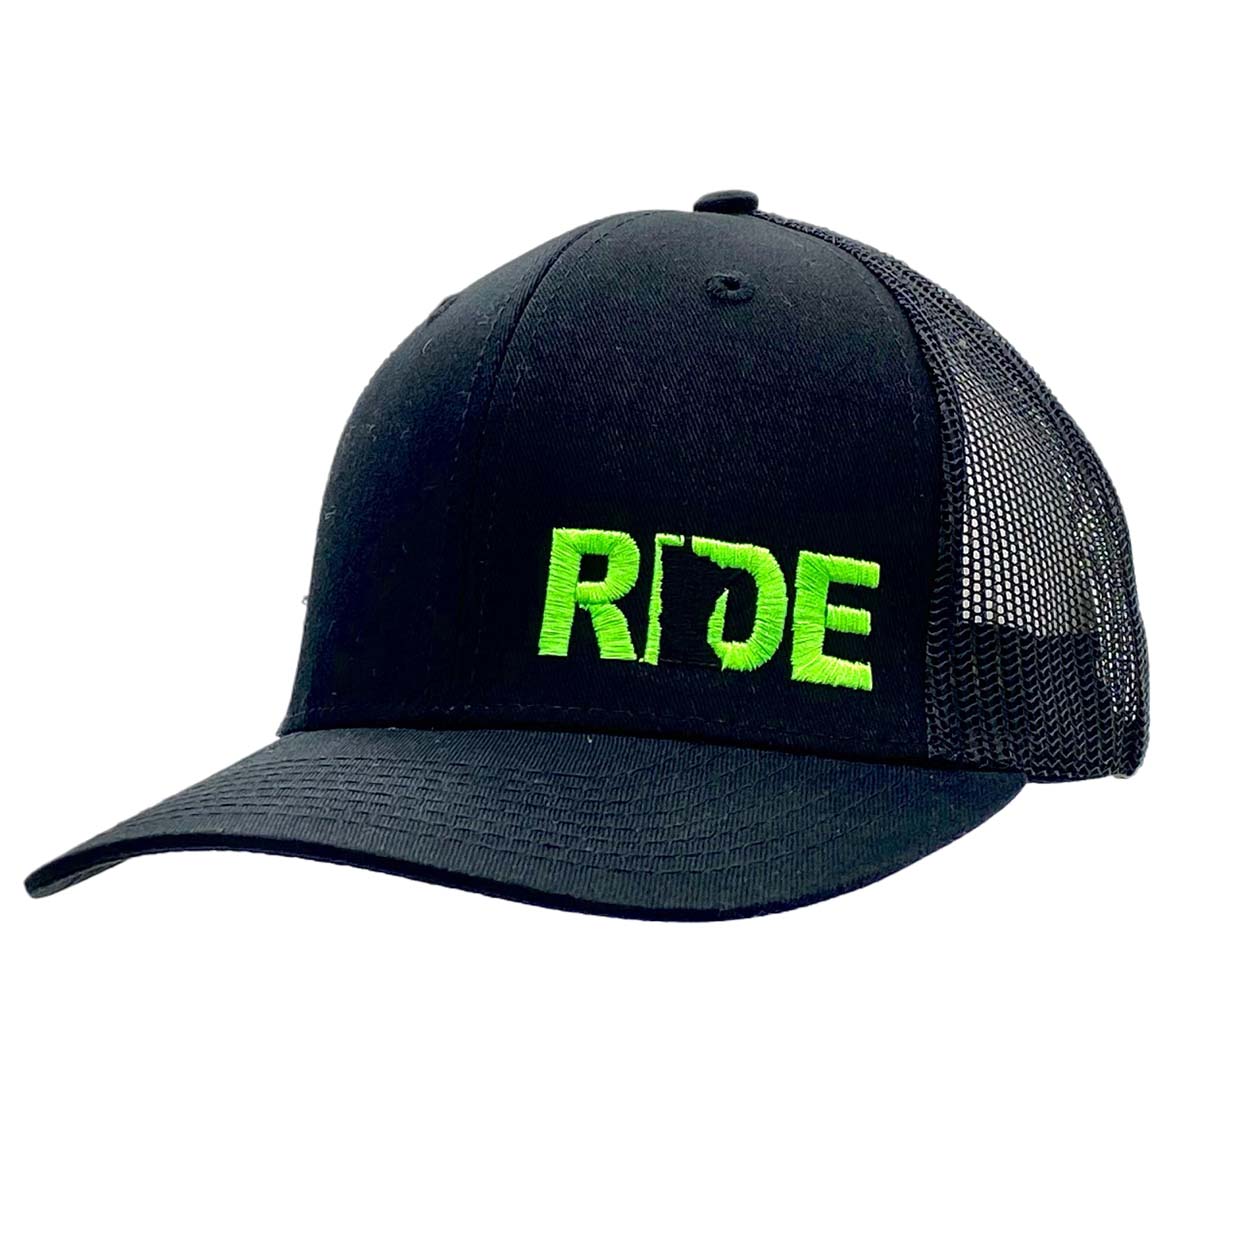 Ride Minnesota Night Out Embroidered Snapback Trucker Hat Black/Neon